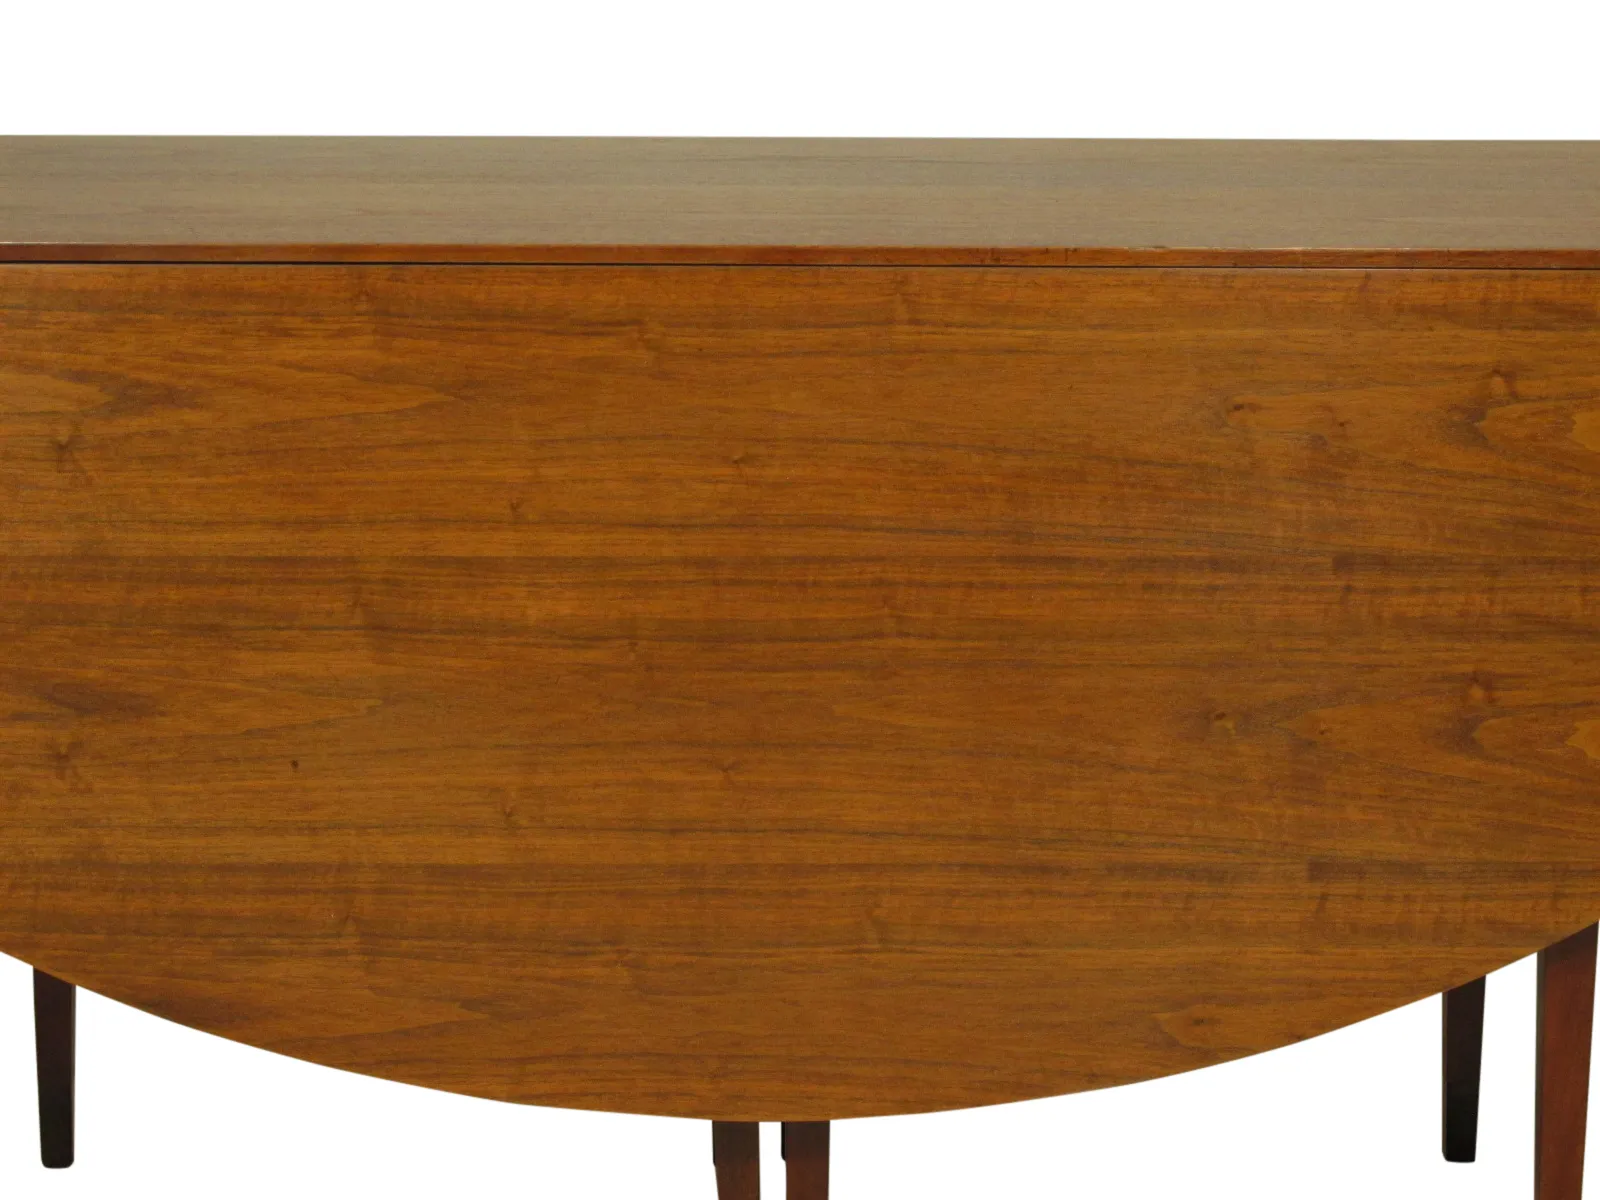 Mid-Century Dining Table By Dunbar - The Barn at 17 Antiques